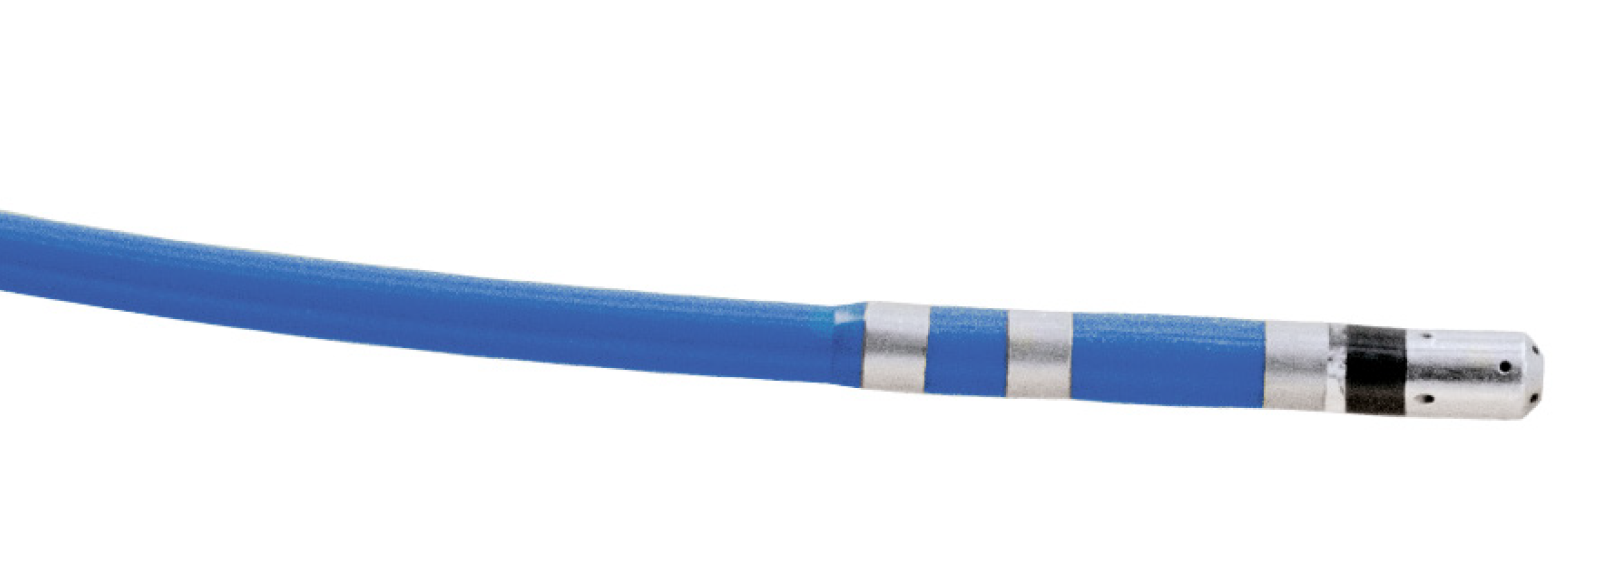 AlCath Flux eXtra 3.5 mm Irrigated Tip Ablation Catheter